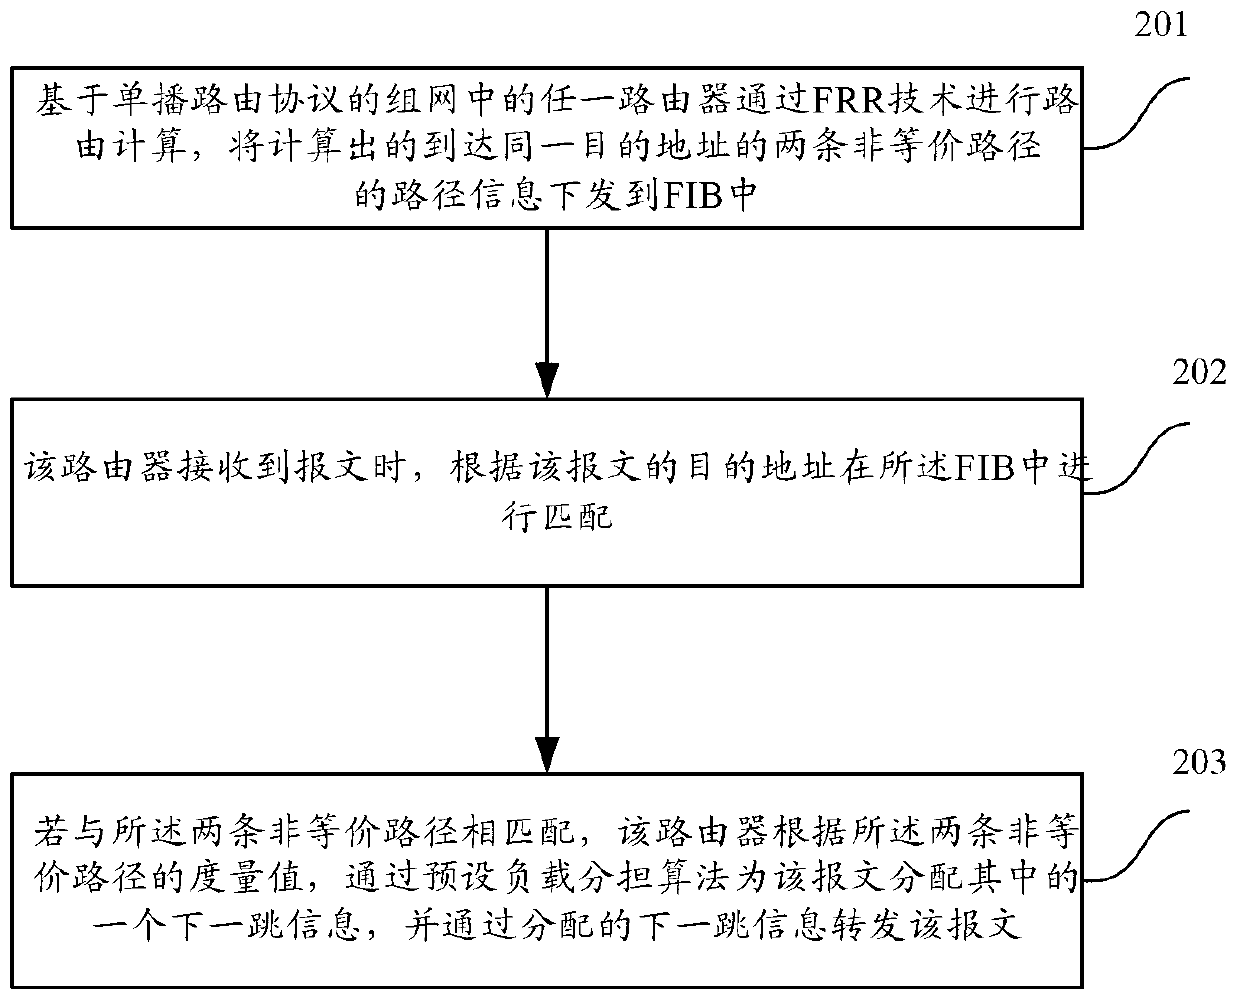 Load sharing method of non-equivalent route and equipment